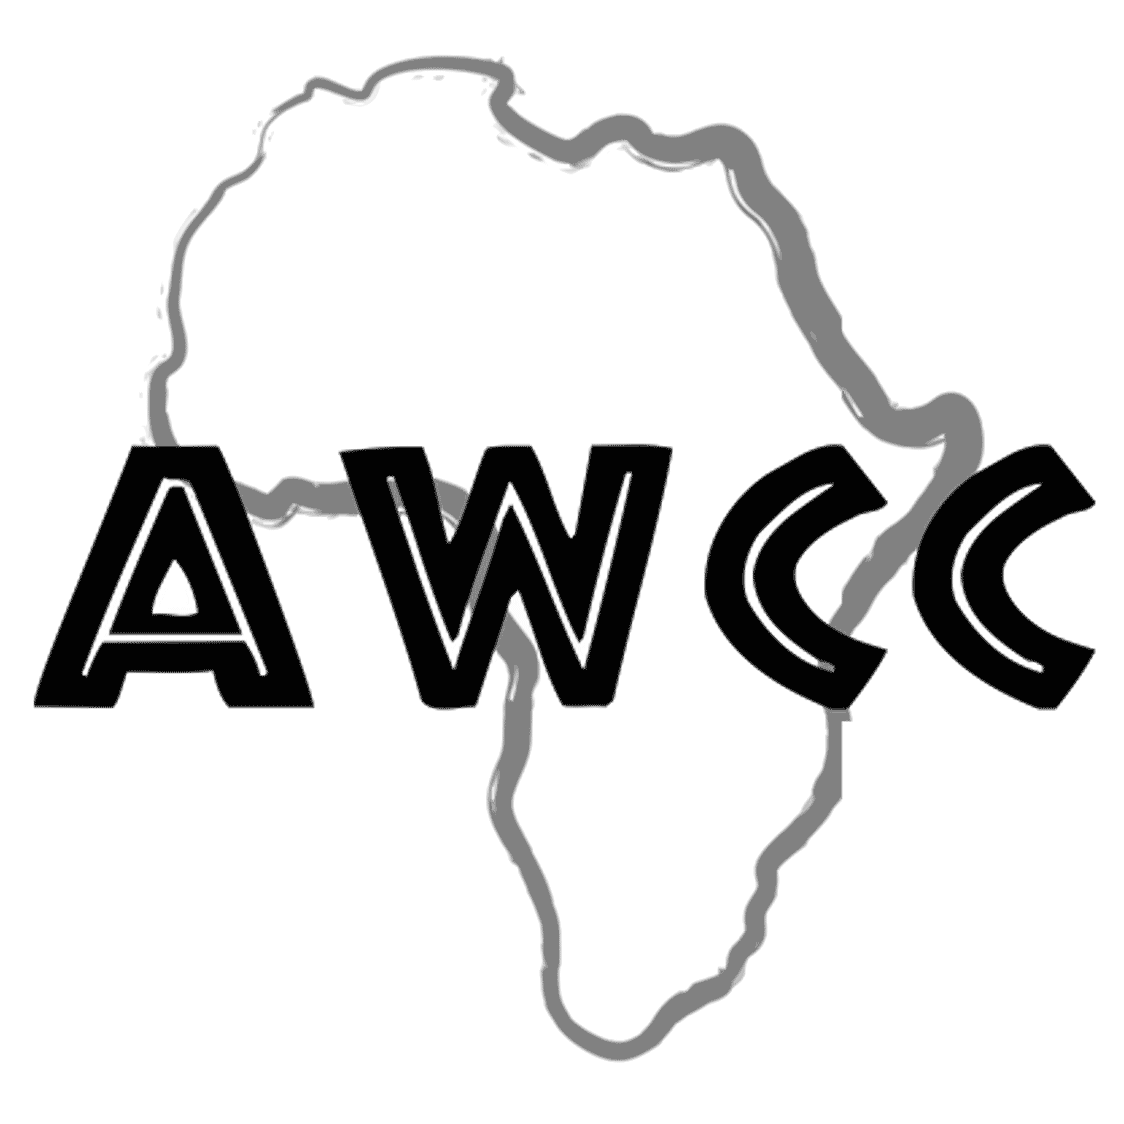 The African Wildlife Conservation Coalition